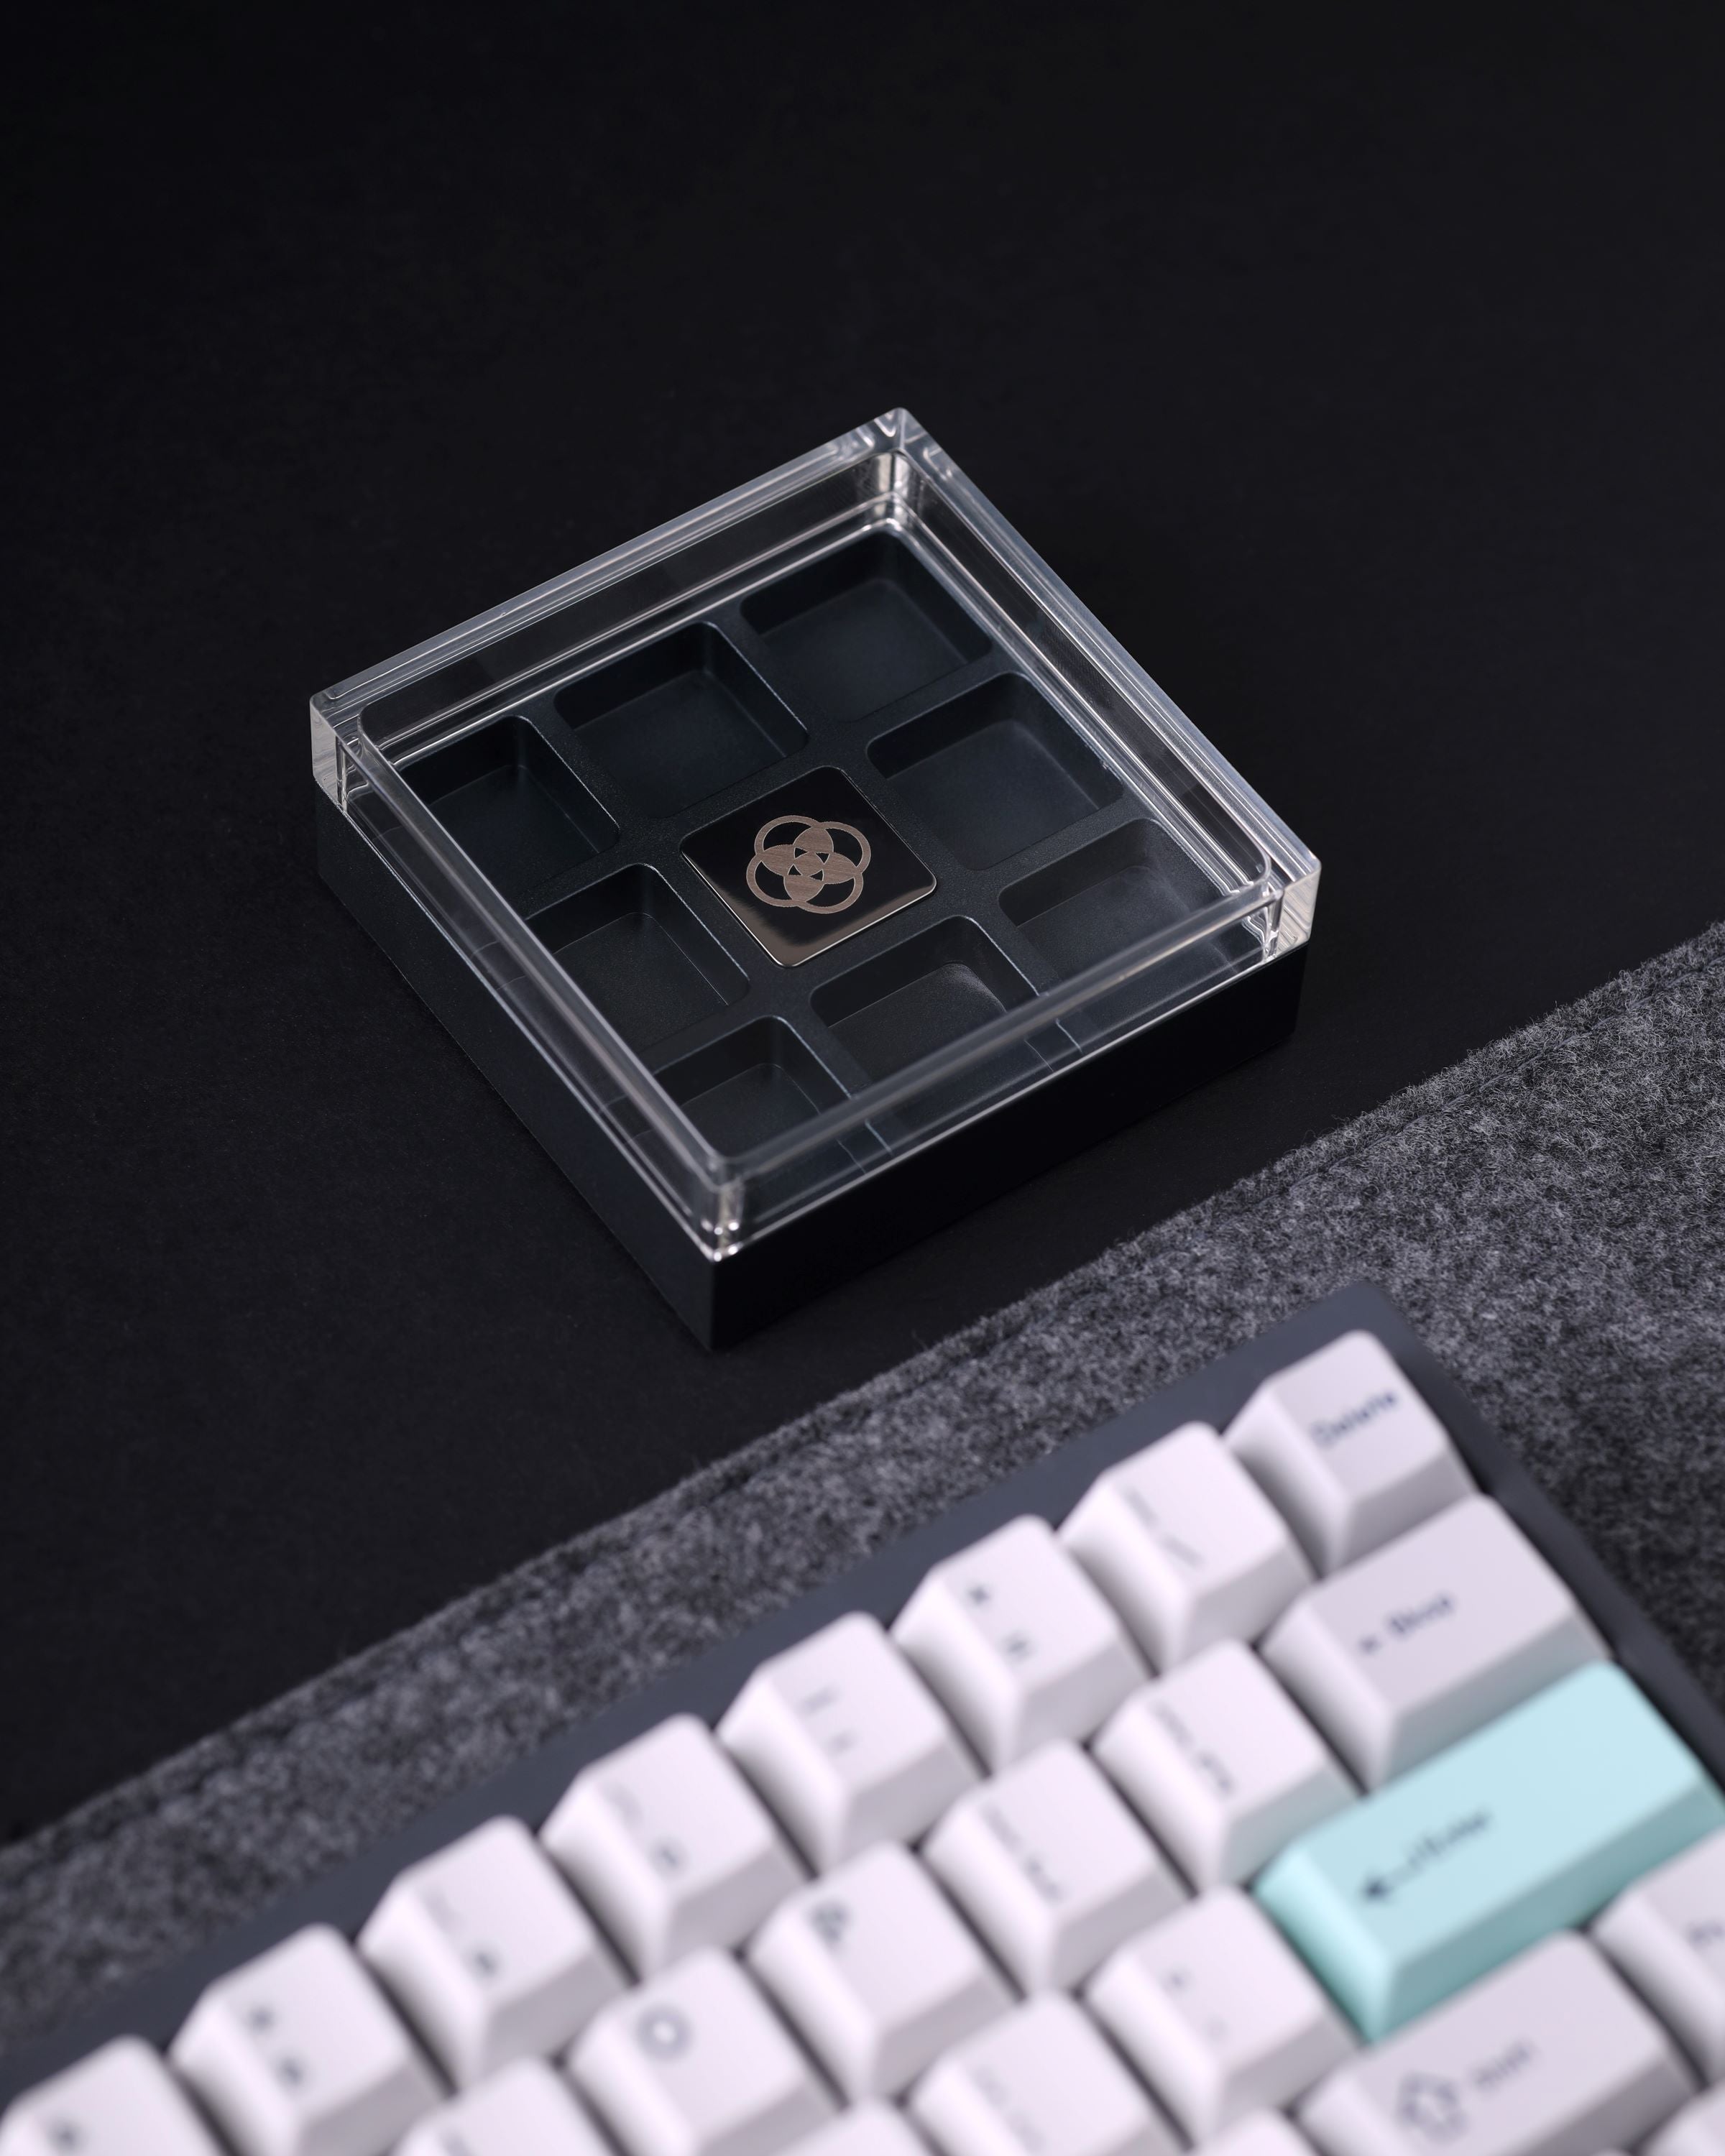 Fragment S Limited Edition - Alpha Keycaps Collab